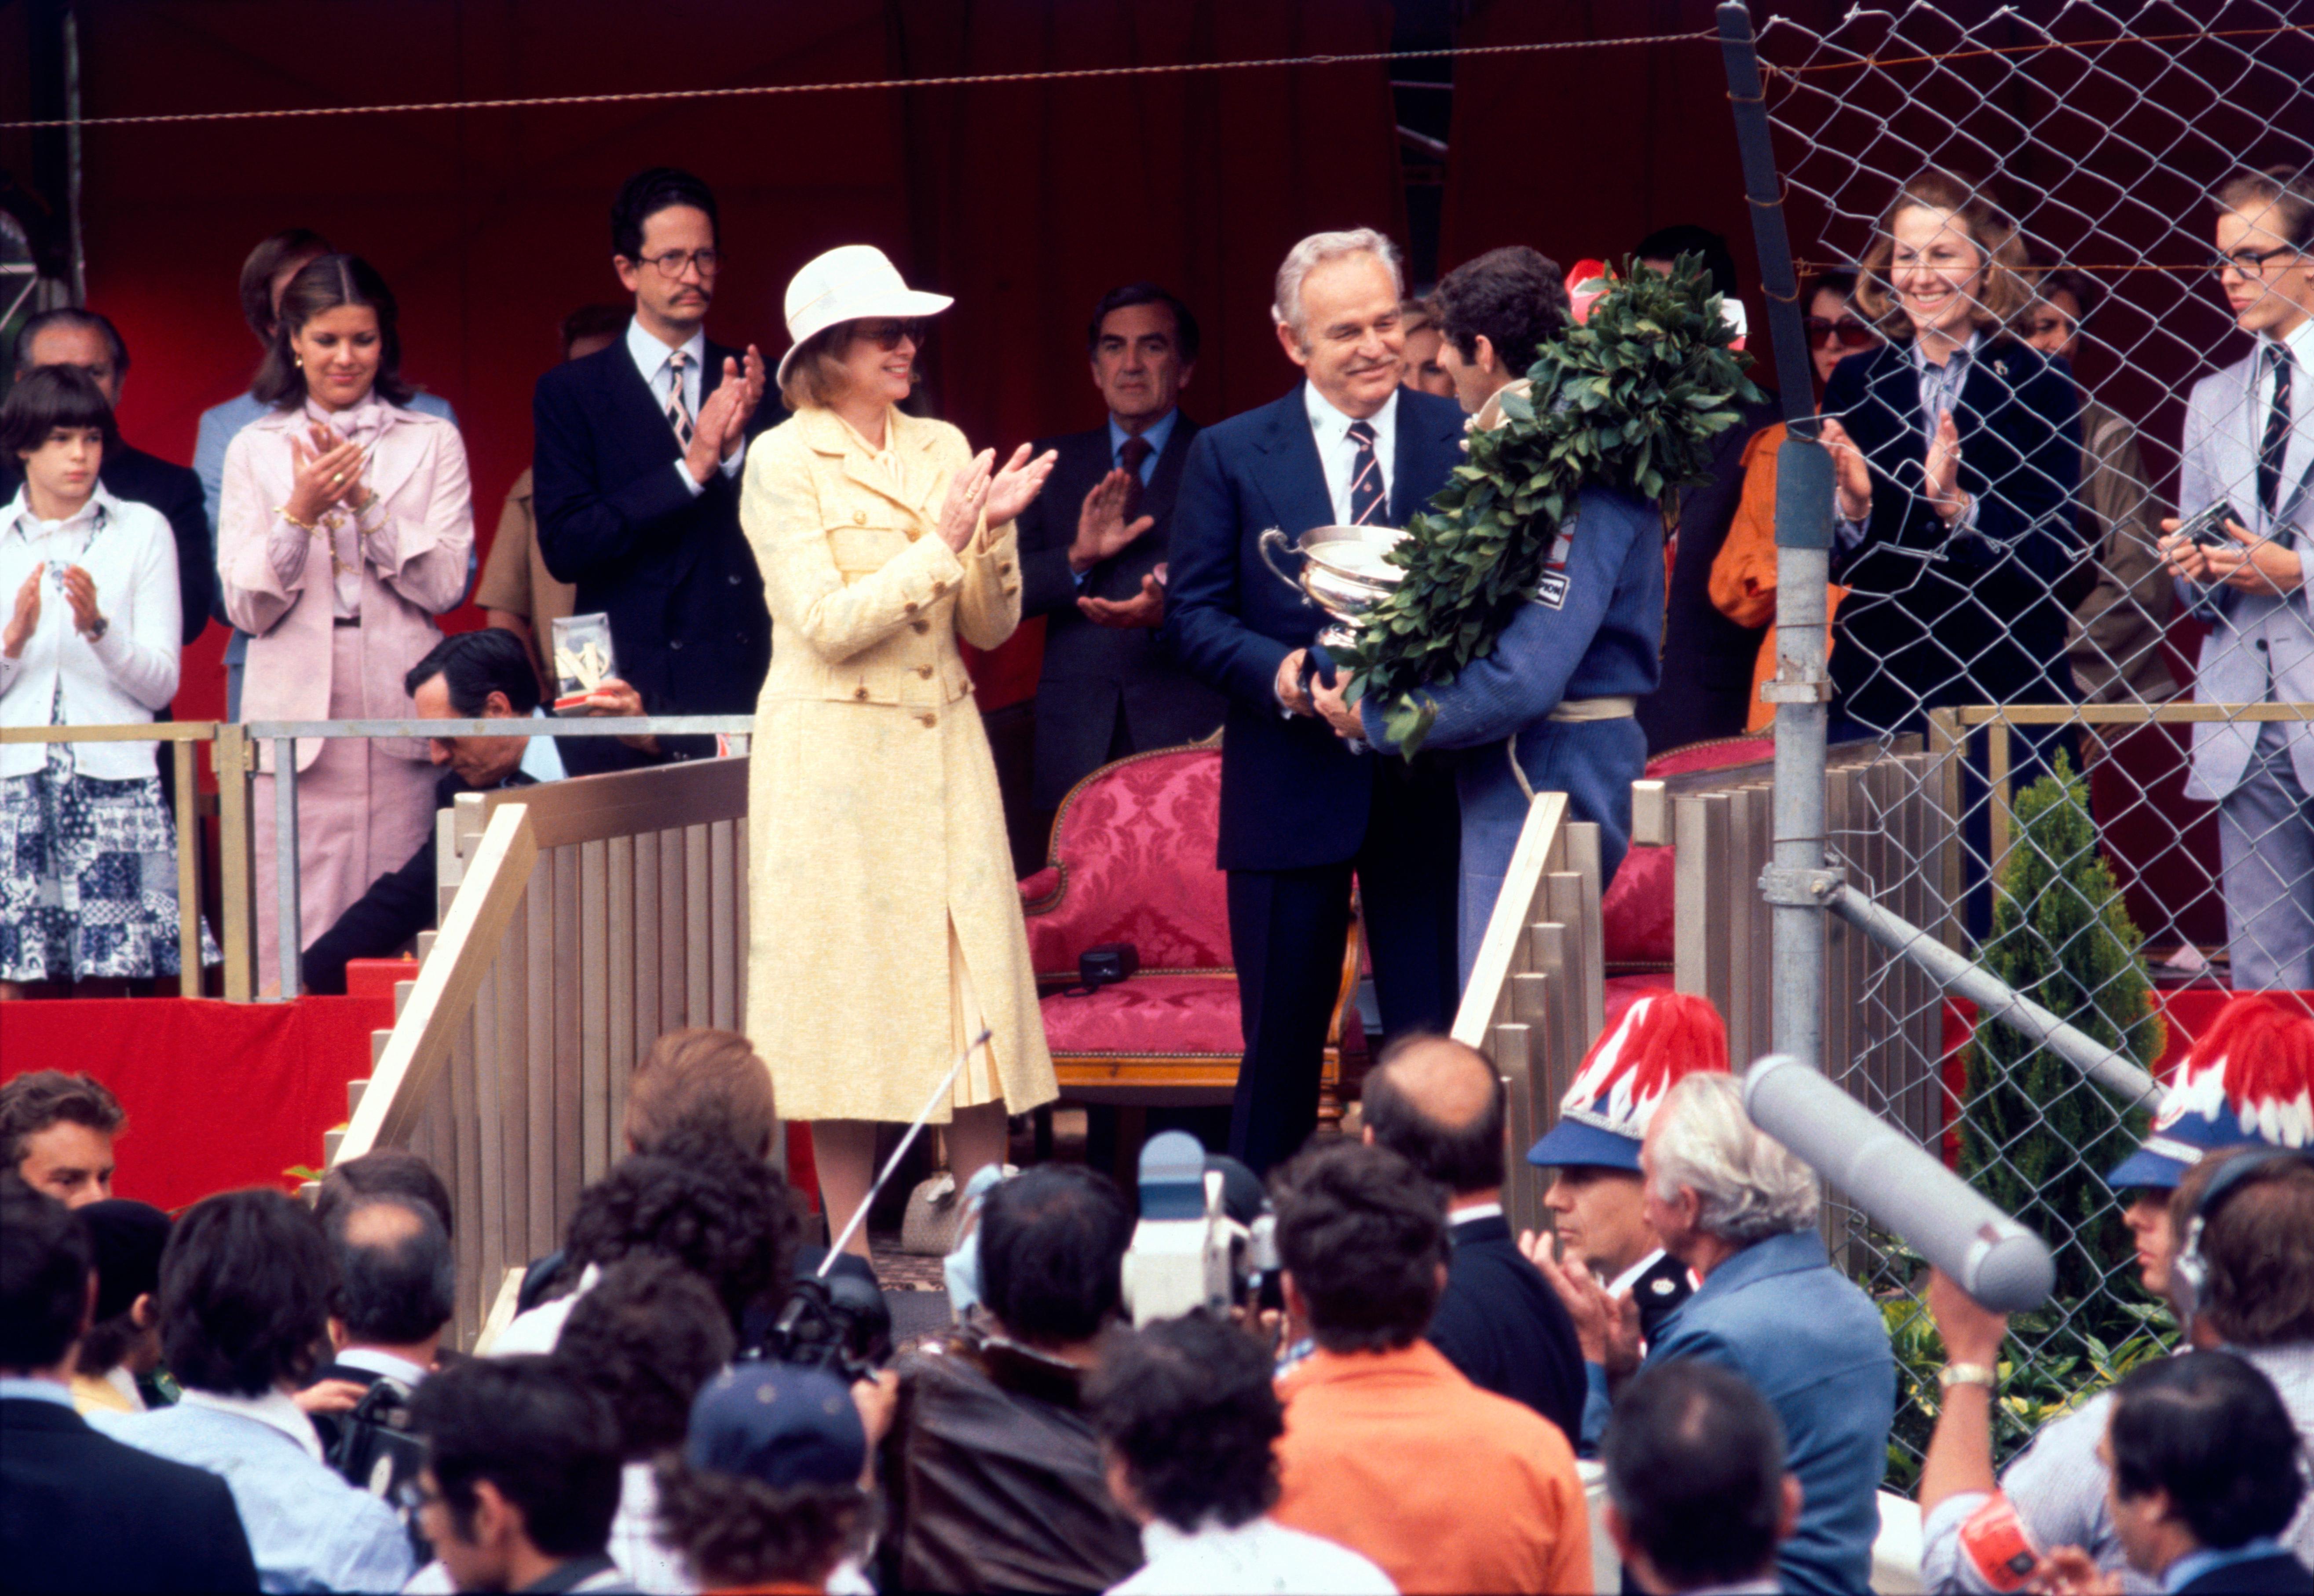 'Monaco Grand Prix' 1977 Slim Aarons Limited Estate Edition Print 

Left to right: princesses Stephanie, Caroline and Grace (1929 - 1982) of Monaco applaud as Prince Rainier III (1923 - 2005) presents a trophy to South African racing driver Jody